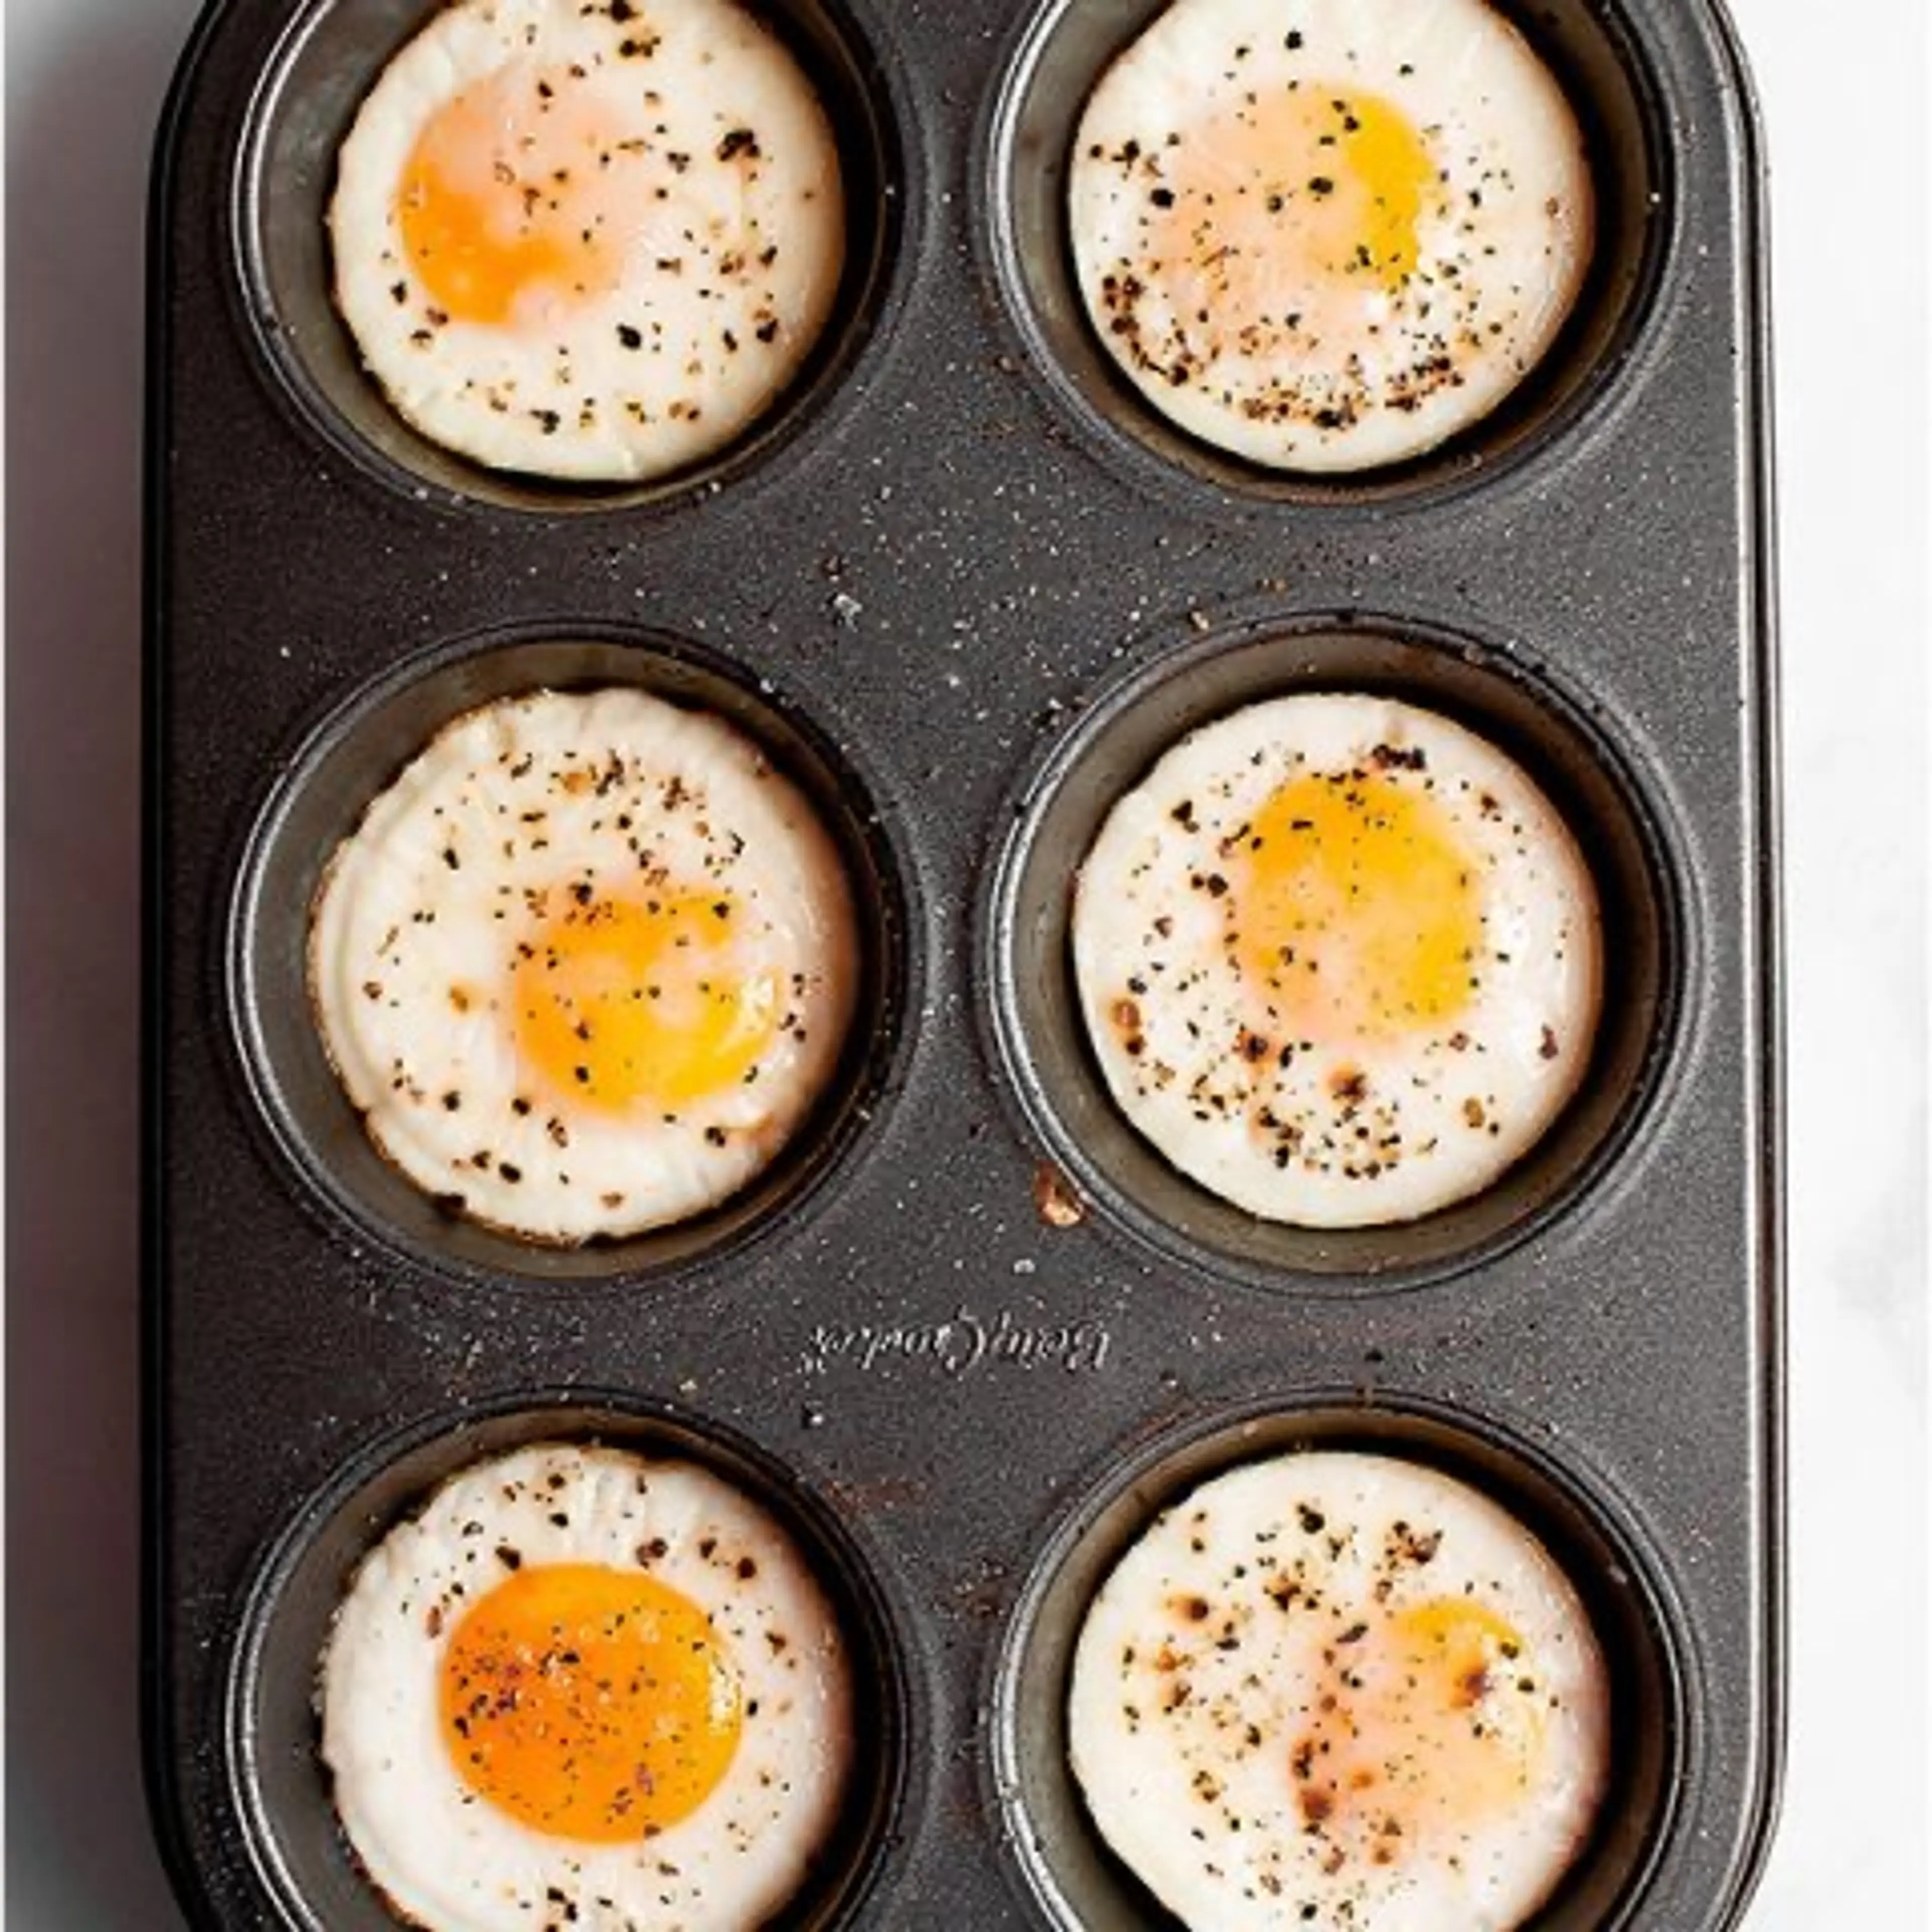 How to Bake Eggs